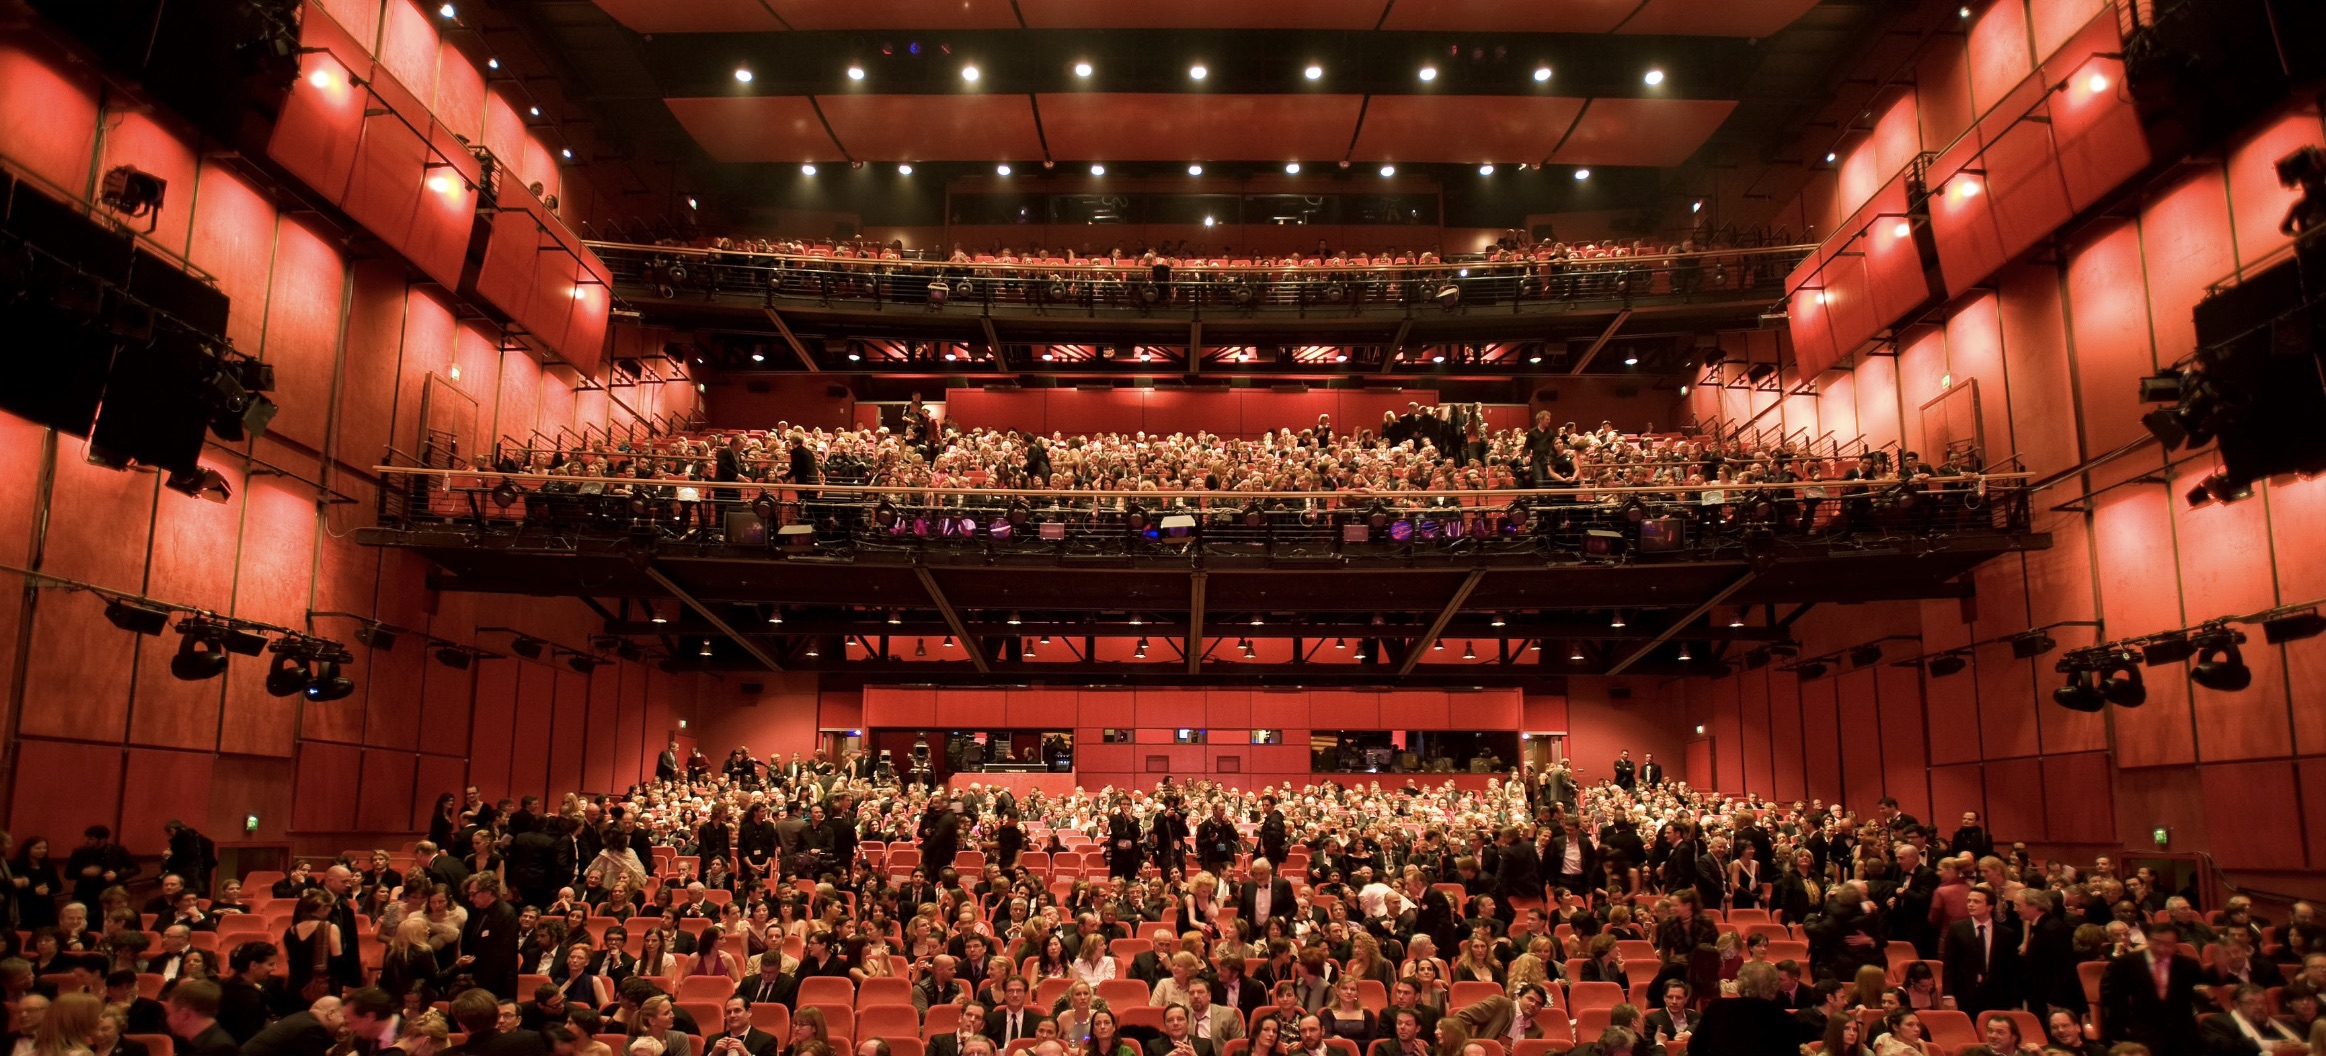  An audience at The Berlin International Film Festival.